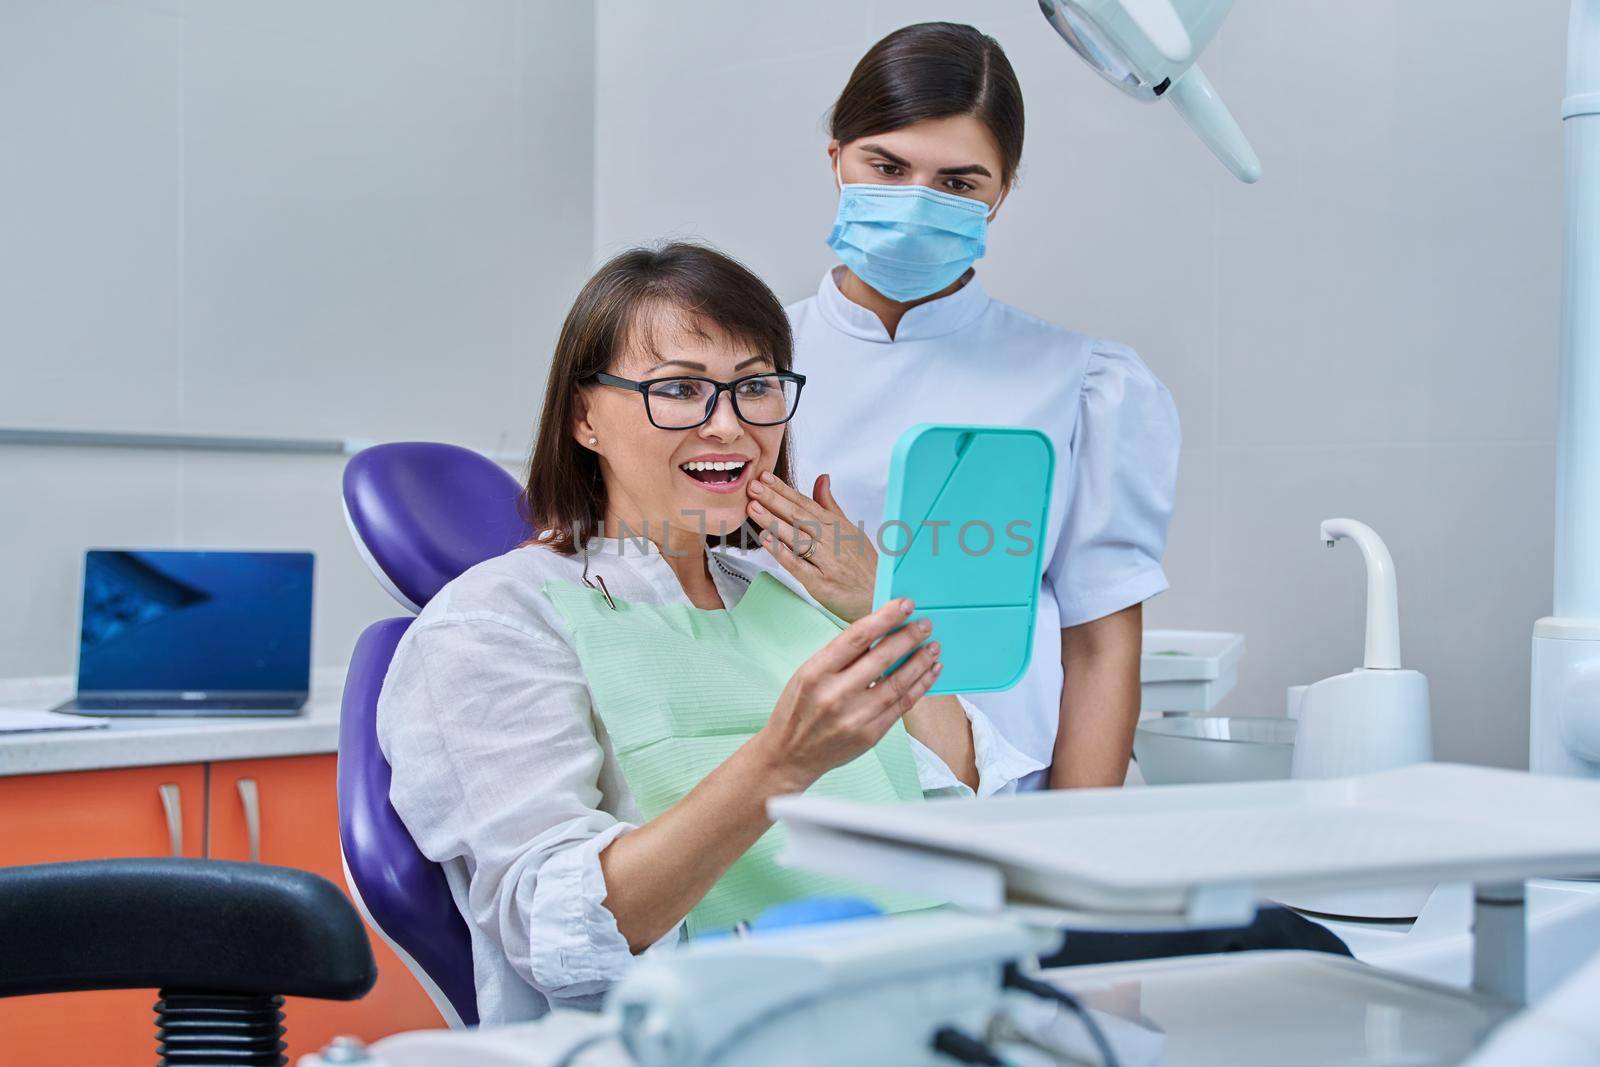 Happy middle aged woman together with dentist, patient sitting in dental chair looking at mirror. Prosthetics, treatment, implantation, dental teeth health, beauty care concept